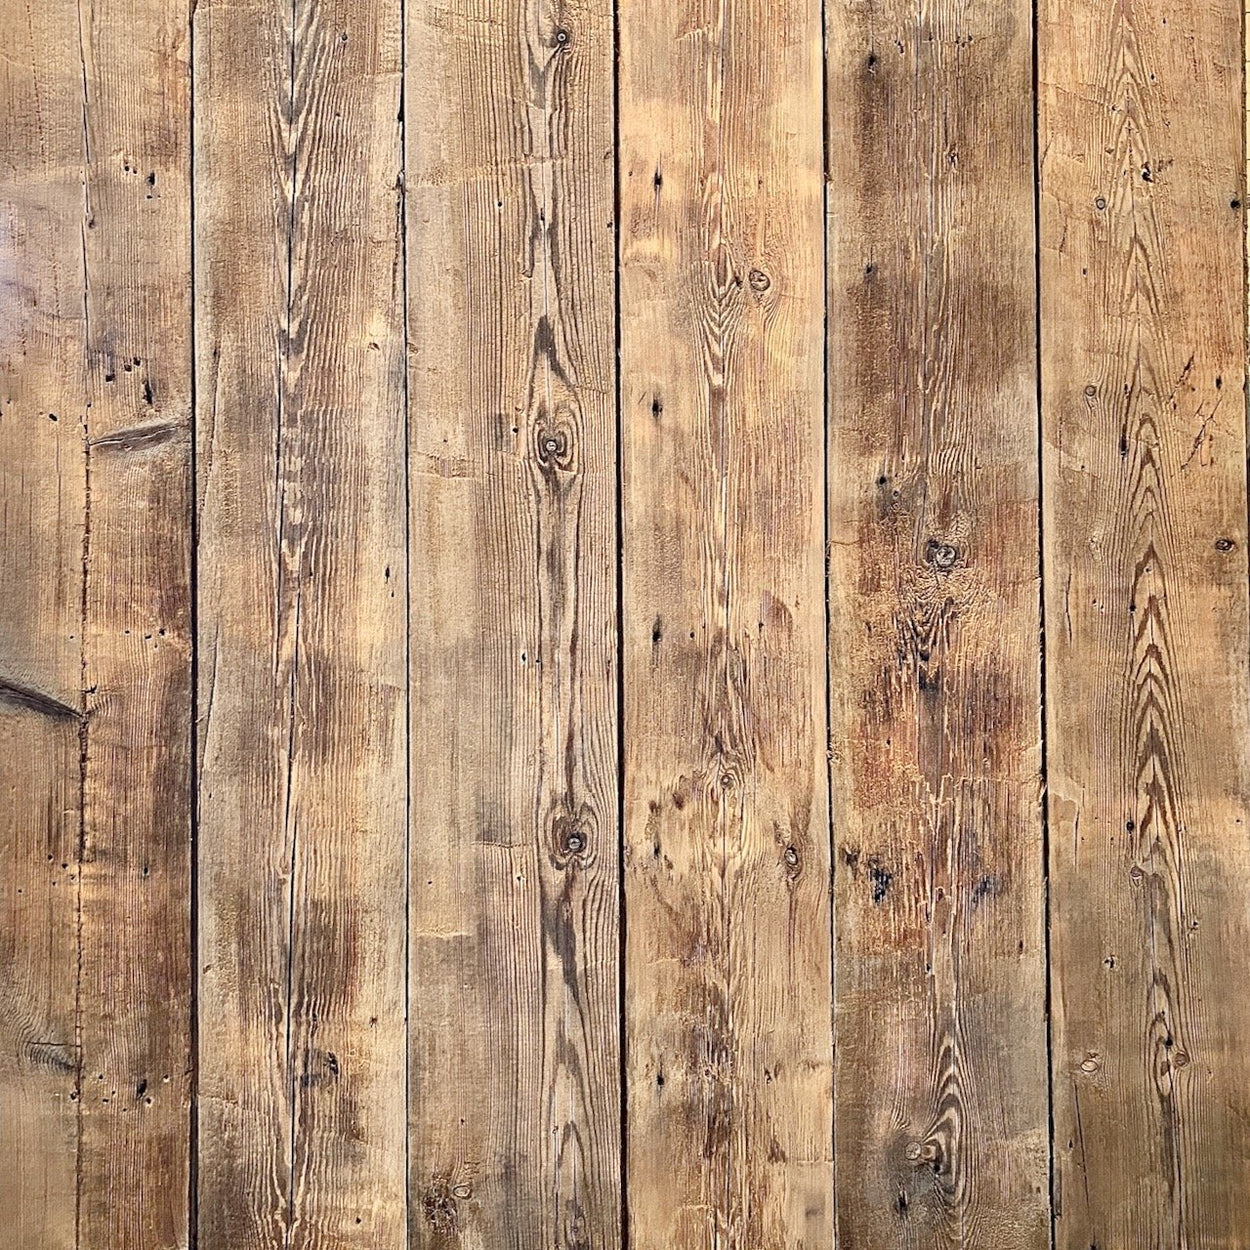 Sample of Reclaimed Engine Shed Cladding Boards